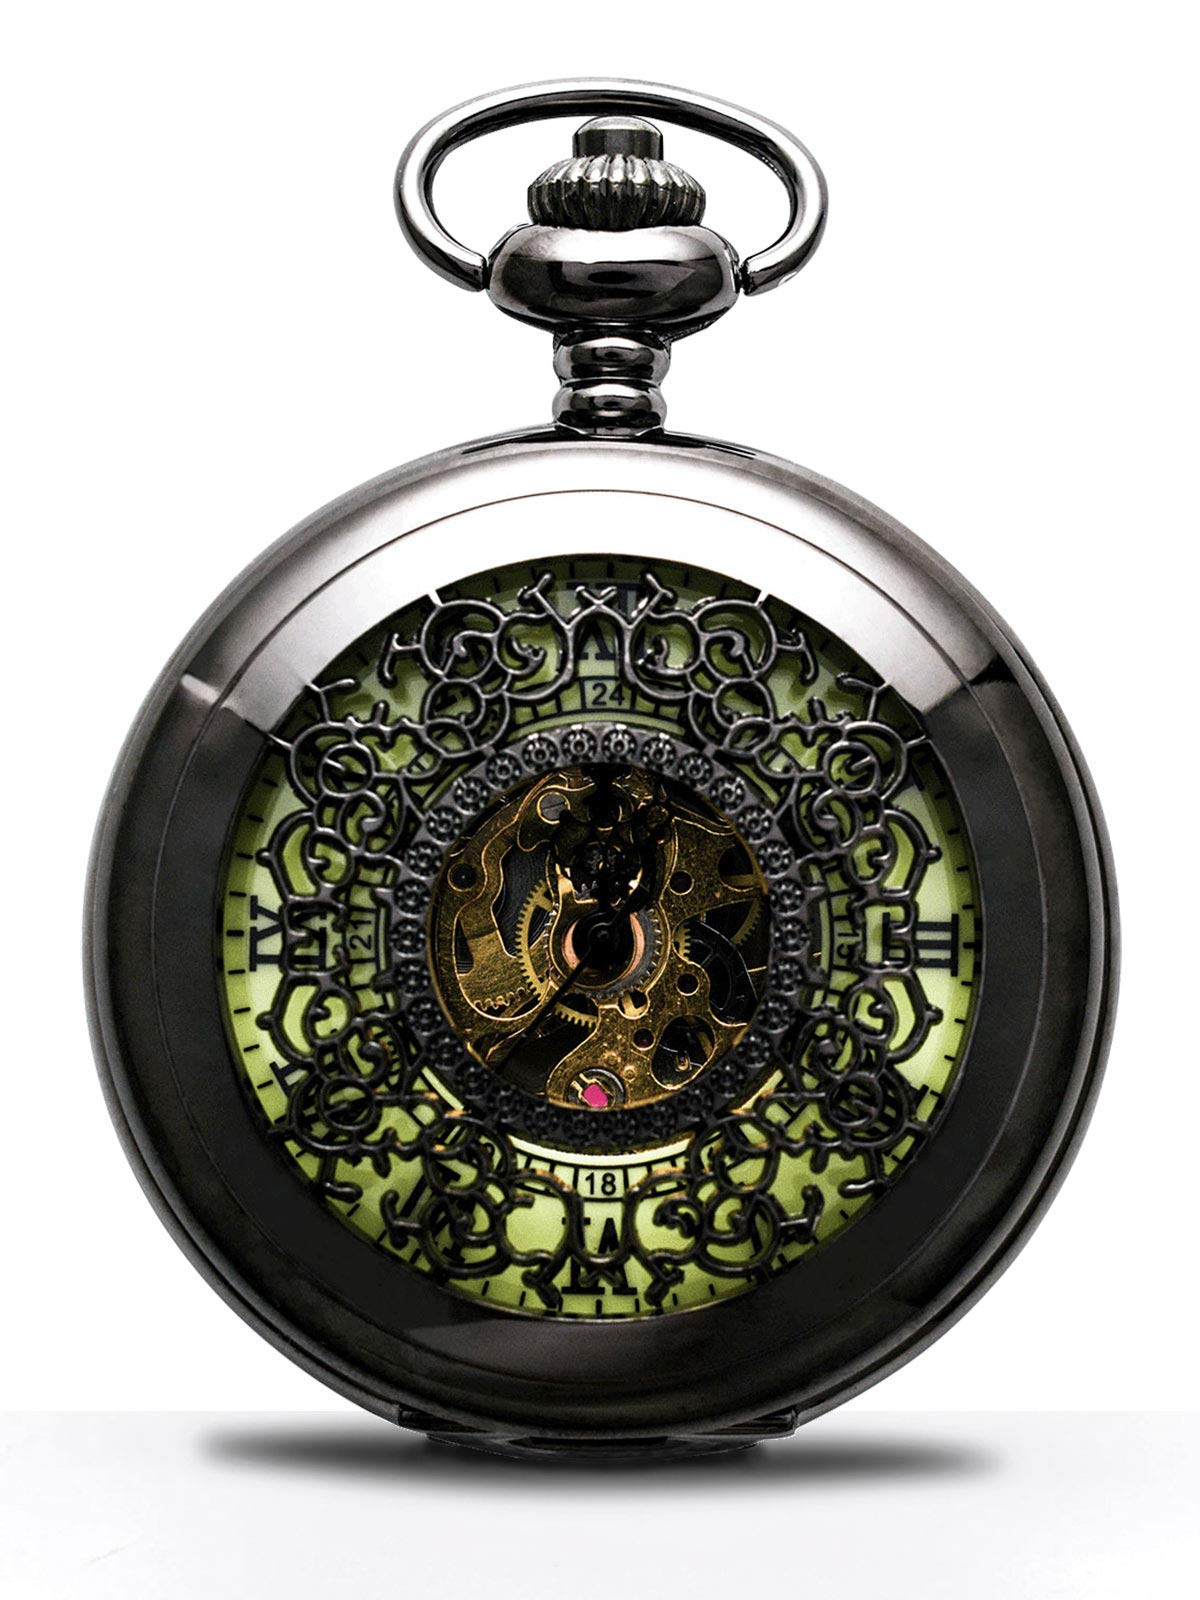 BOSHIYA Vintage Mechanical Pocket Watches for Men Luminous Steampunk Pocket Watch with Chain Black Skeleton Dial Roman Numberals Pocketwatch Gifts for Fathers Day